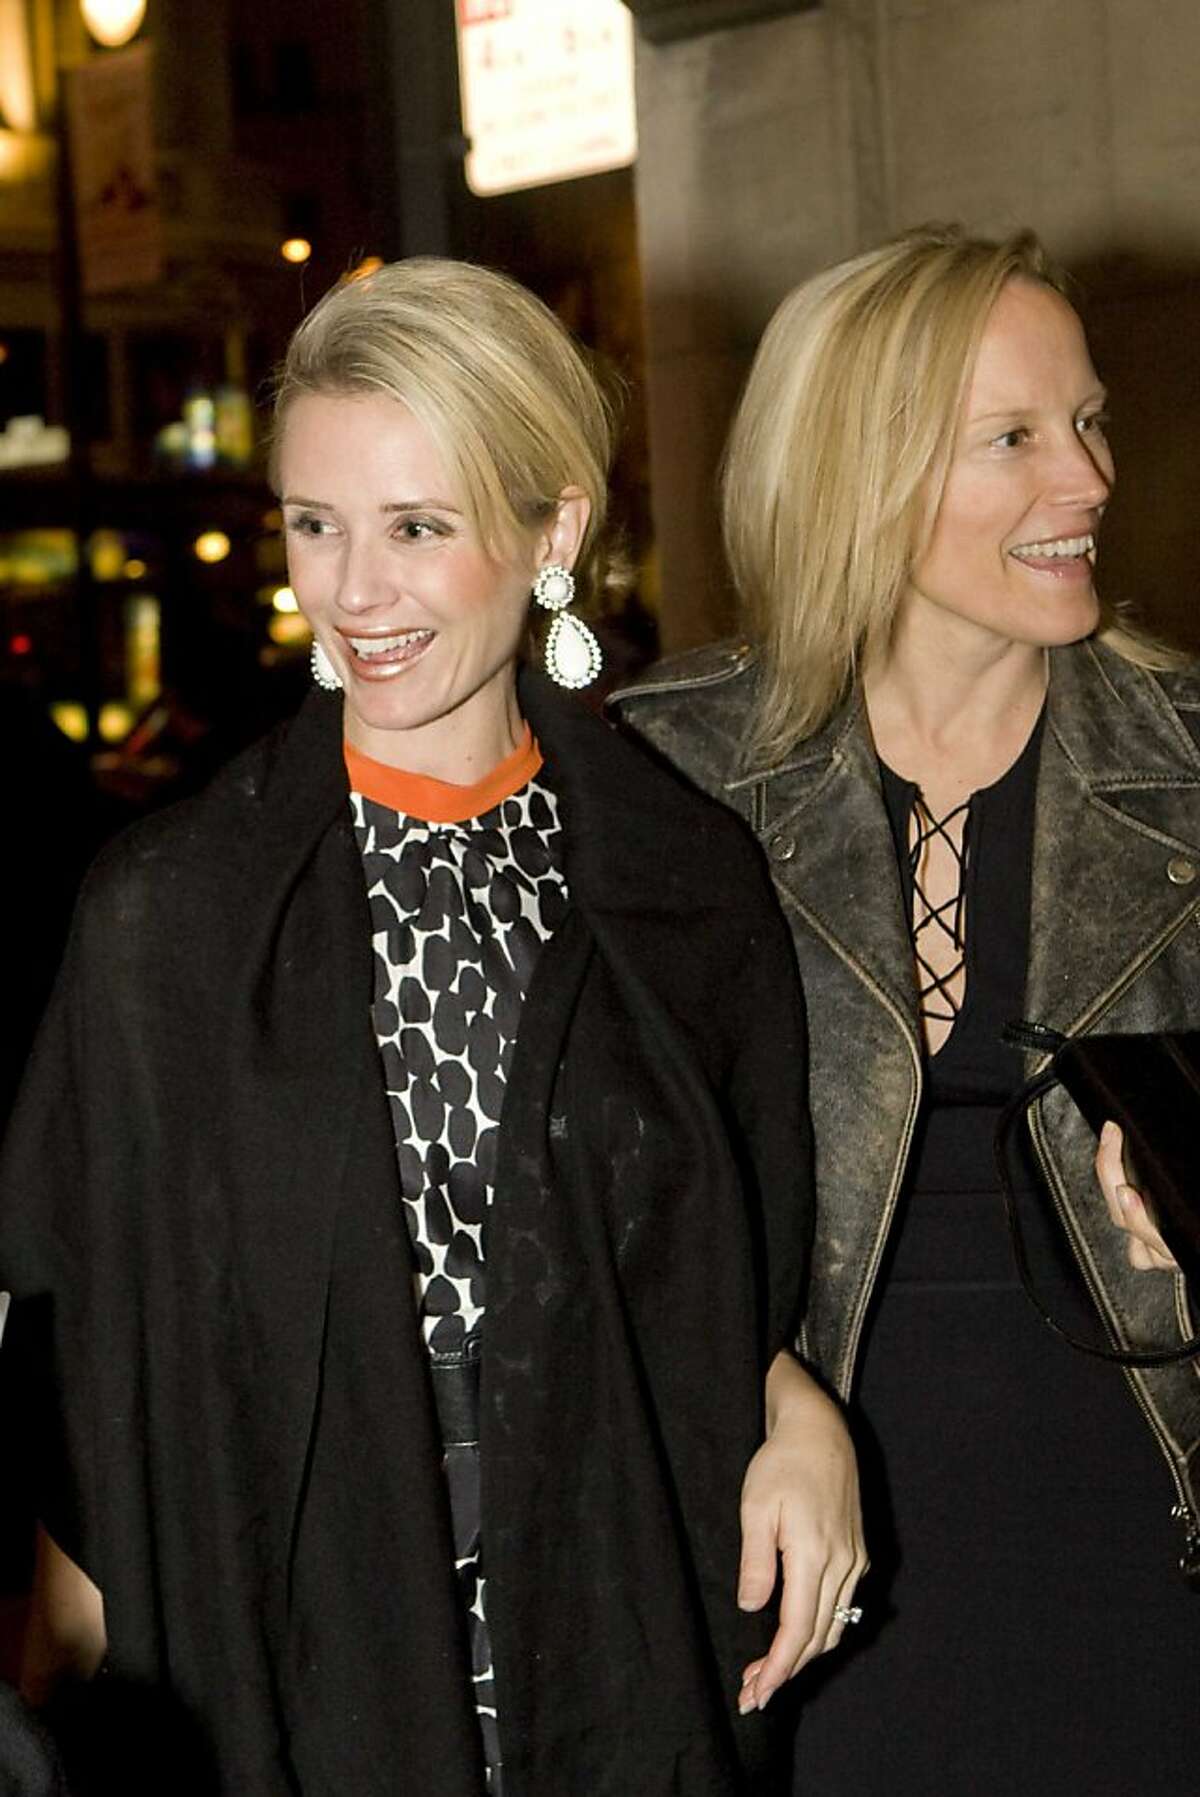 Stylist Marcy Carmack, seen here with clientJennifer Siebel Newsom, is launching a new website called Therealreal.com